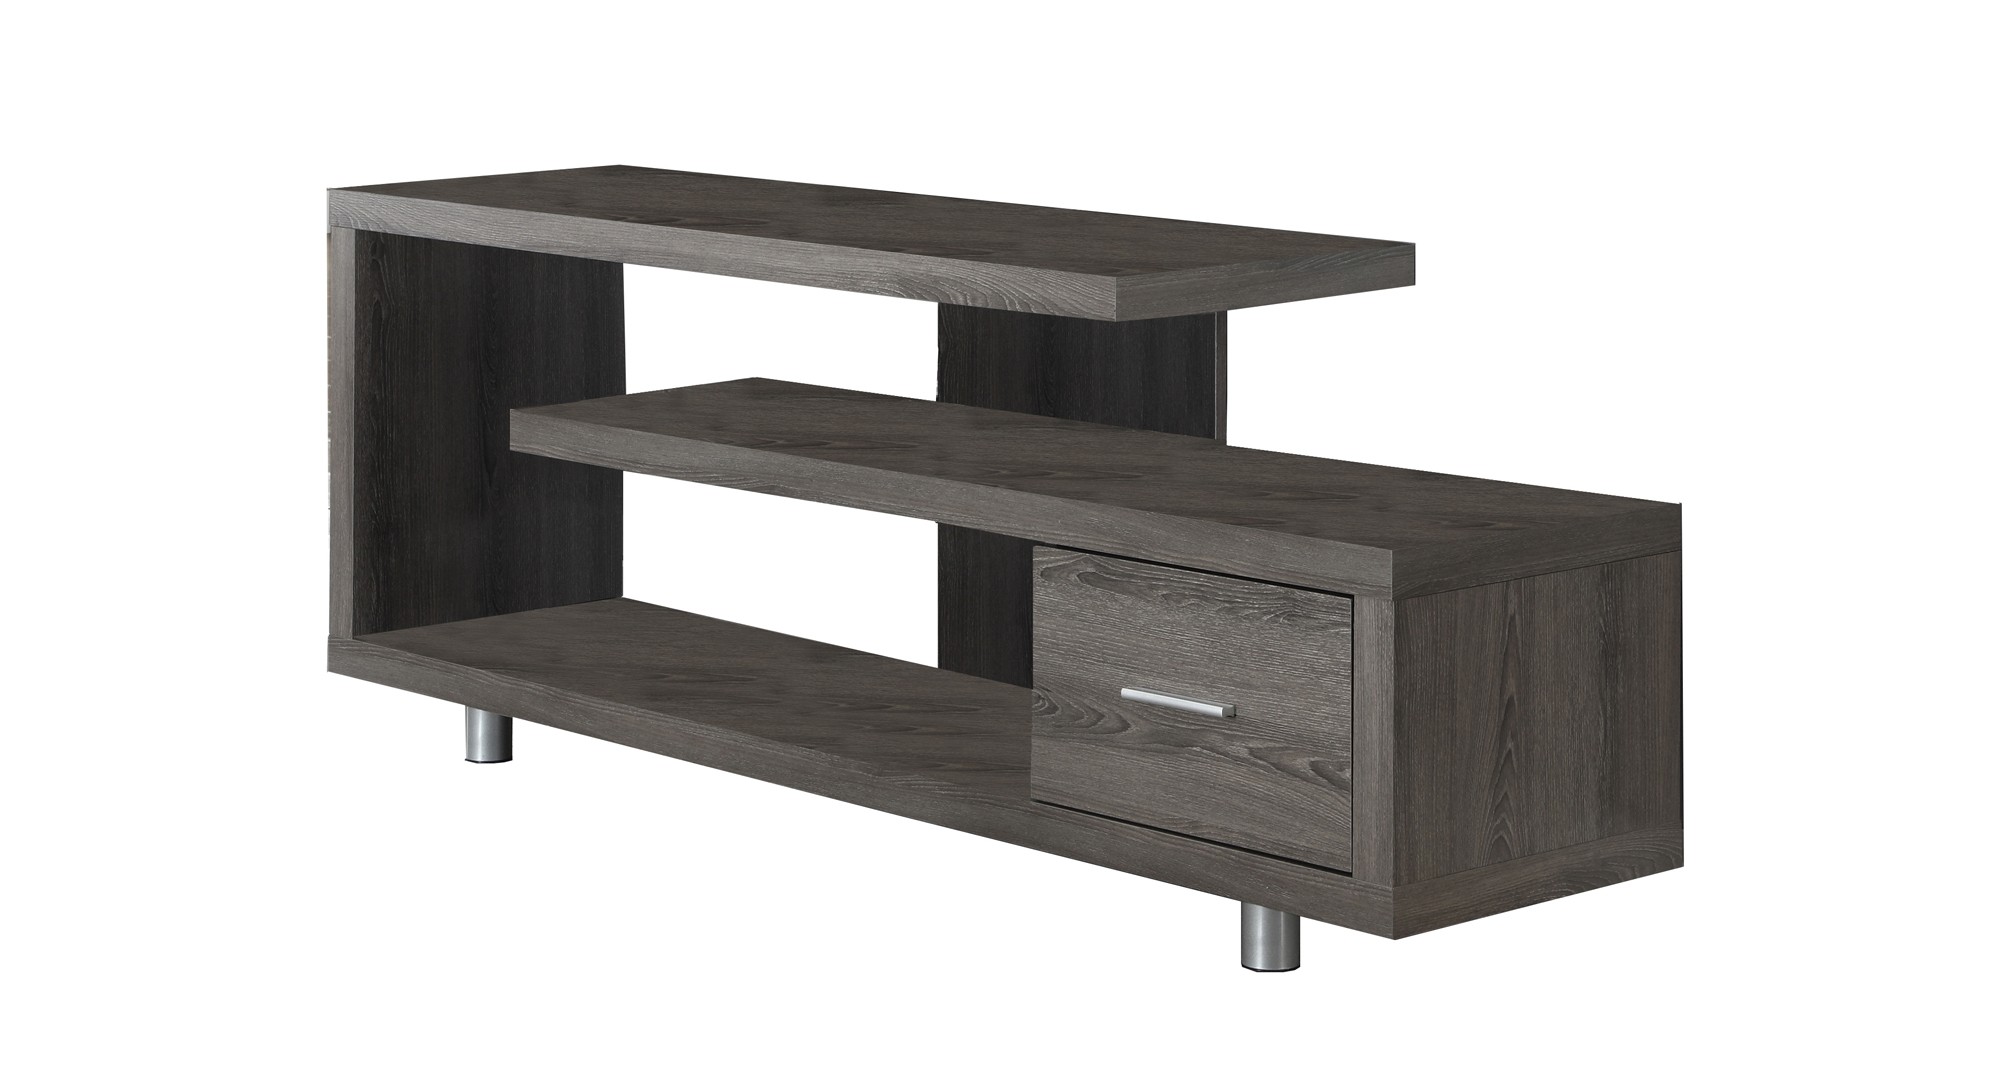 15.75" x 60" x 24" Dark Taupe Silver Particle Board Hollow Core Metal TV Stand with a Drawer